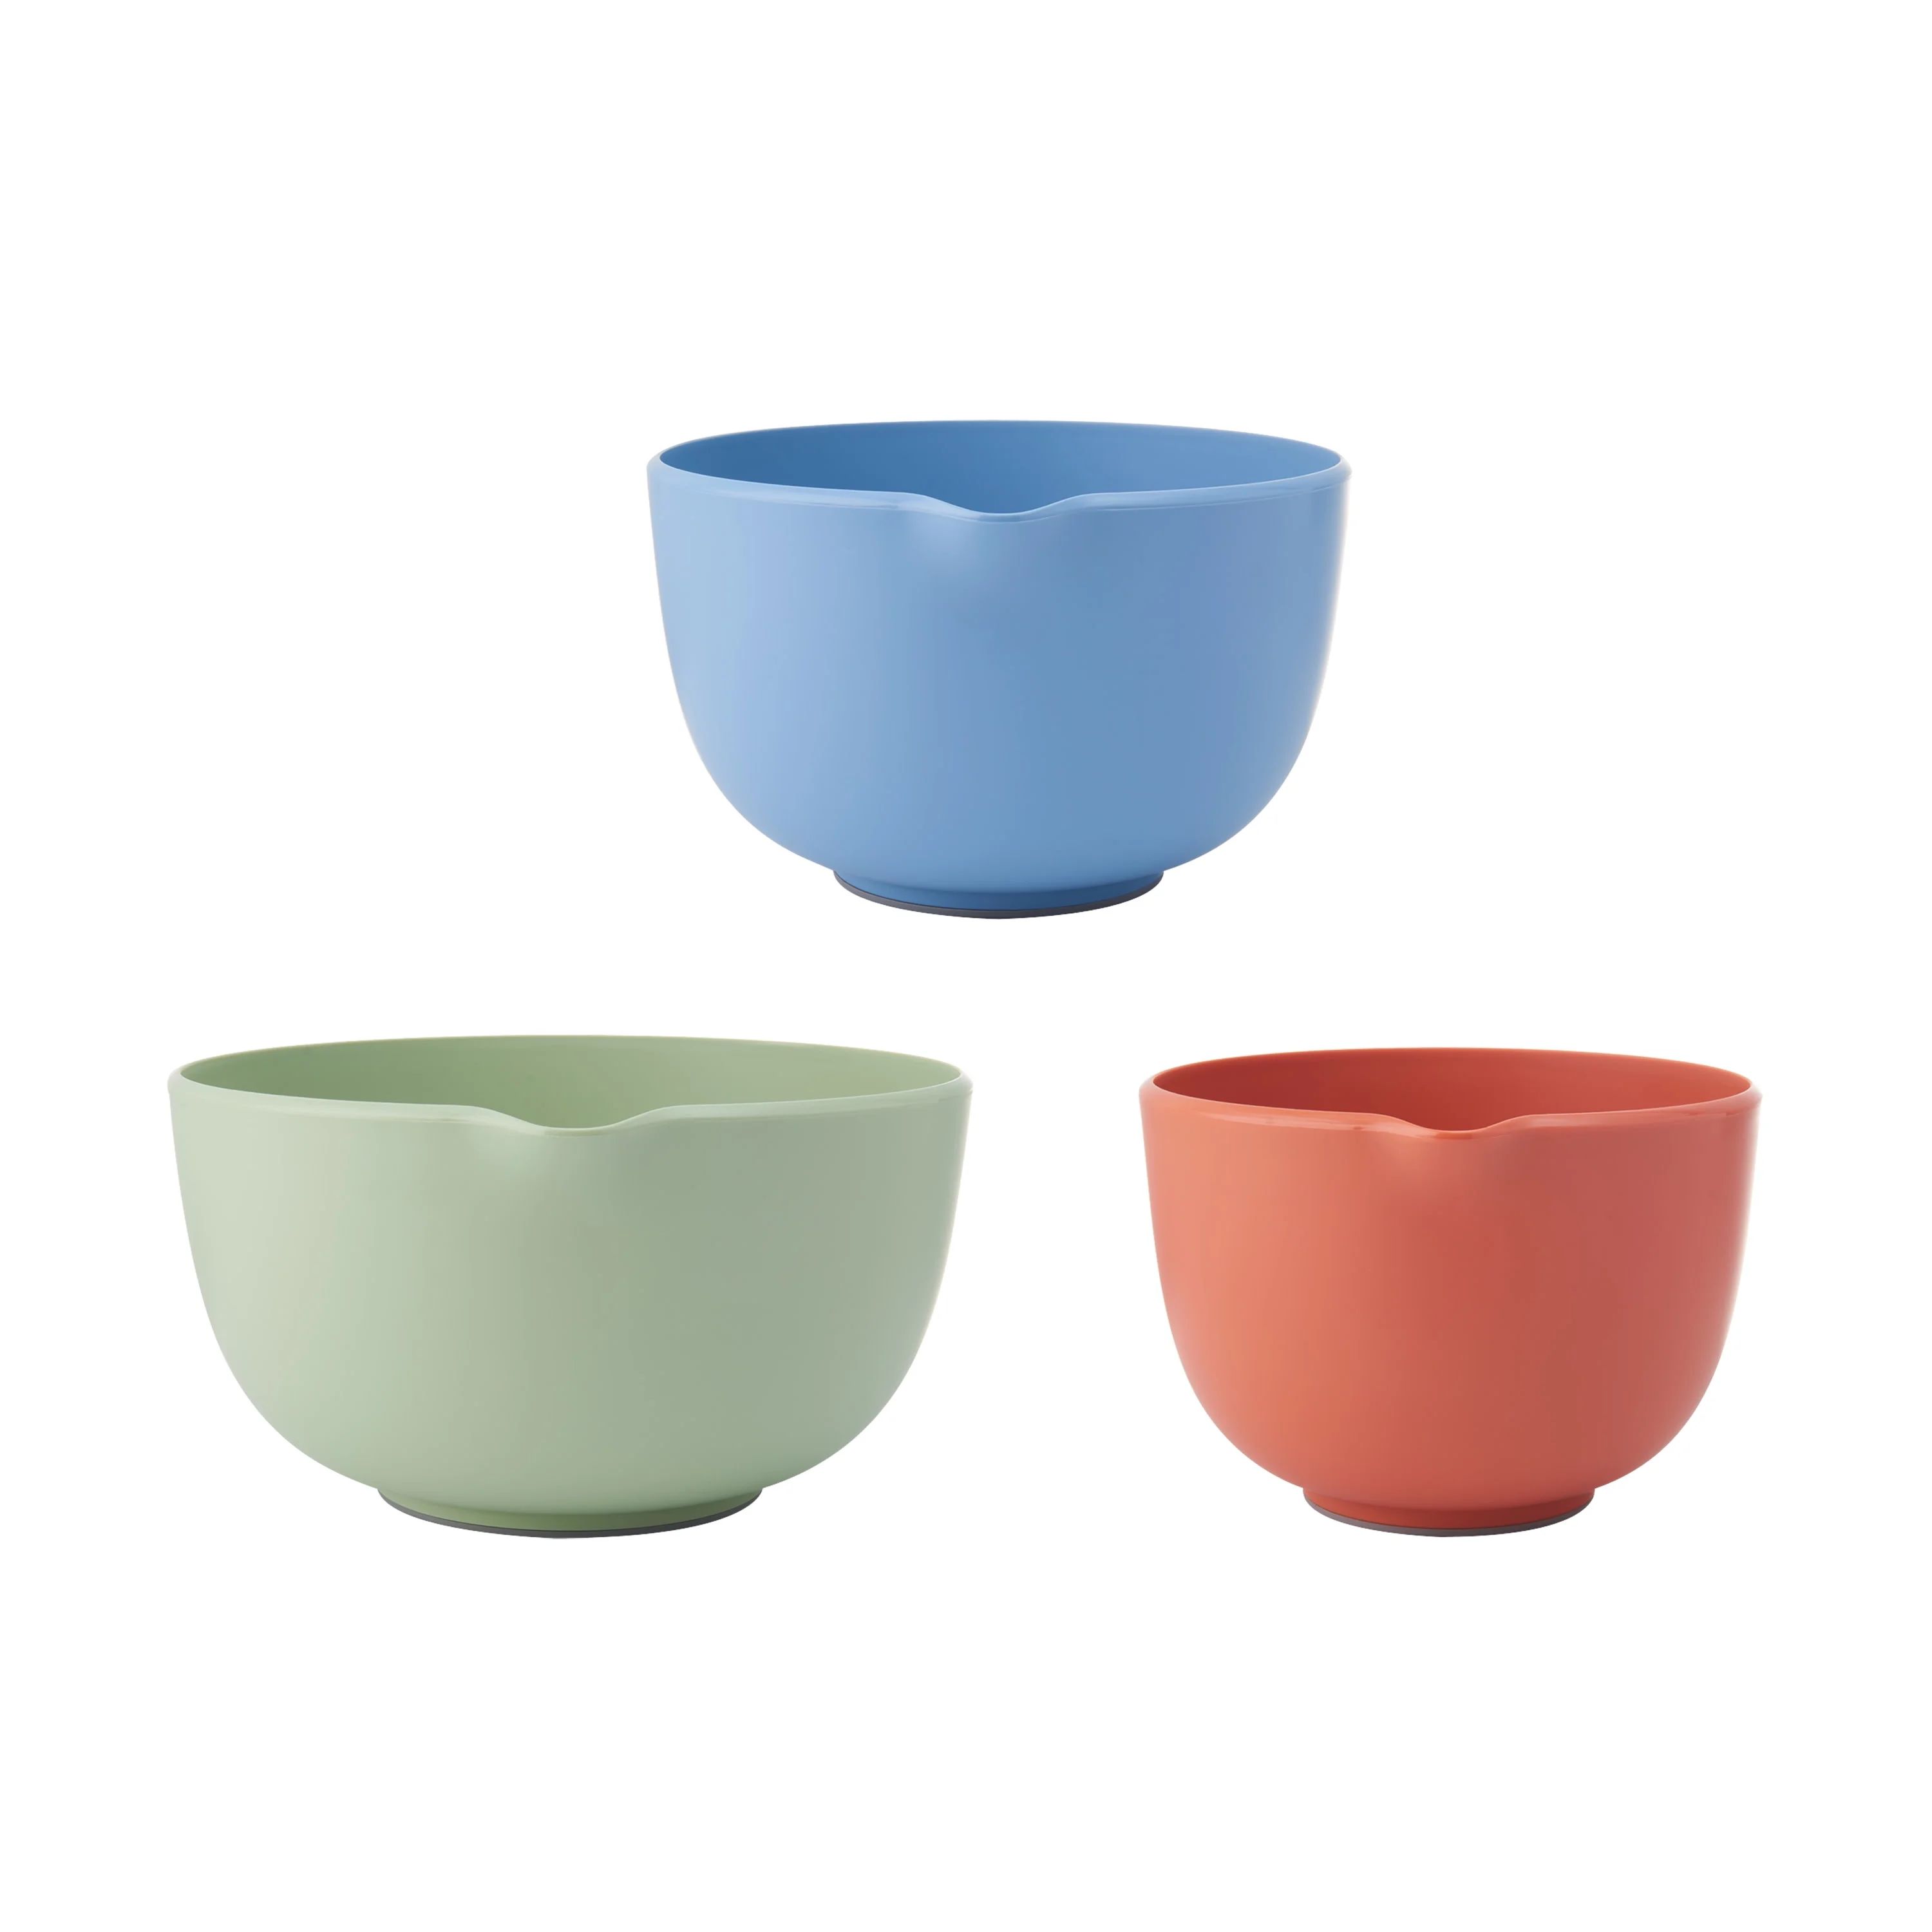 Beautiful Set of 3 Bowls; Small, Medium and Large in Assorted Colors by Drew Barrymore | Walmart (US)